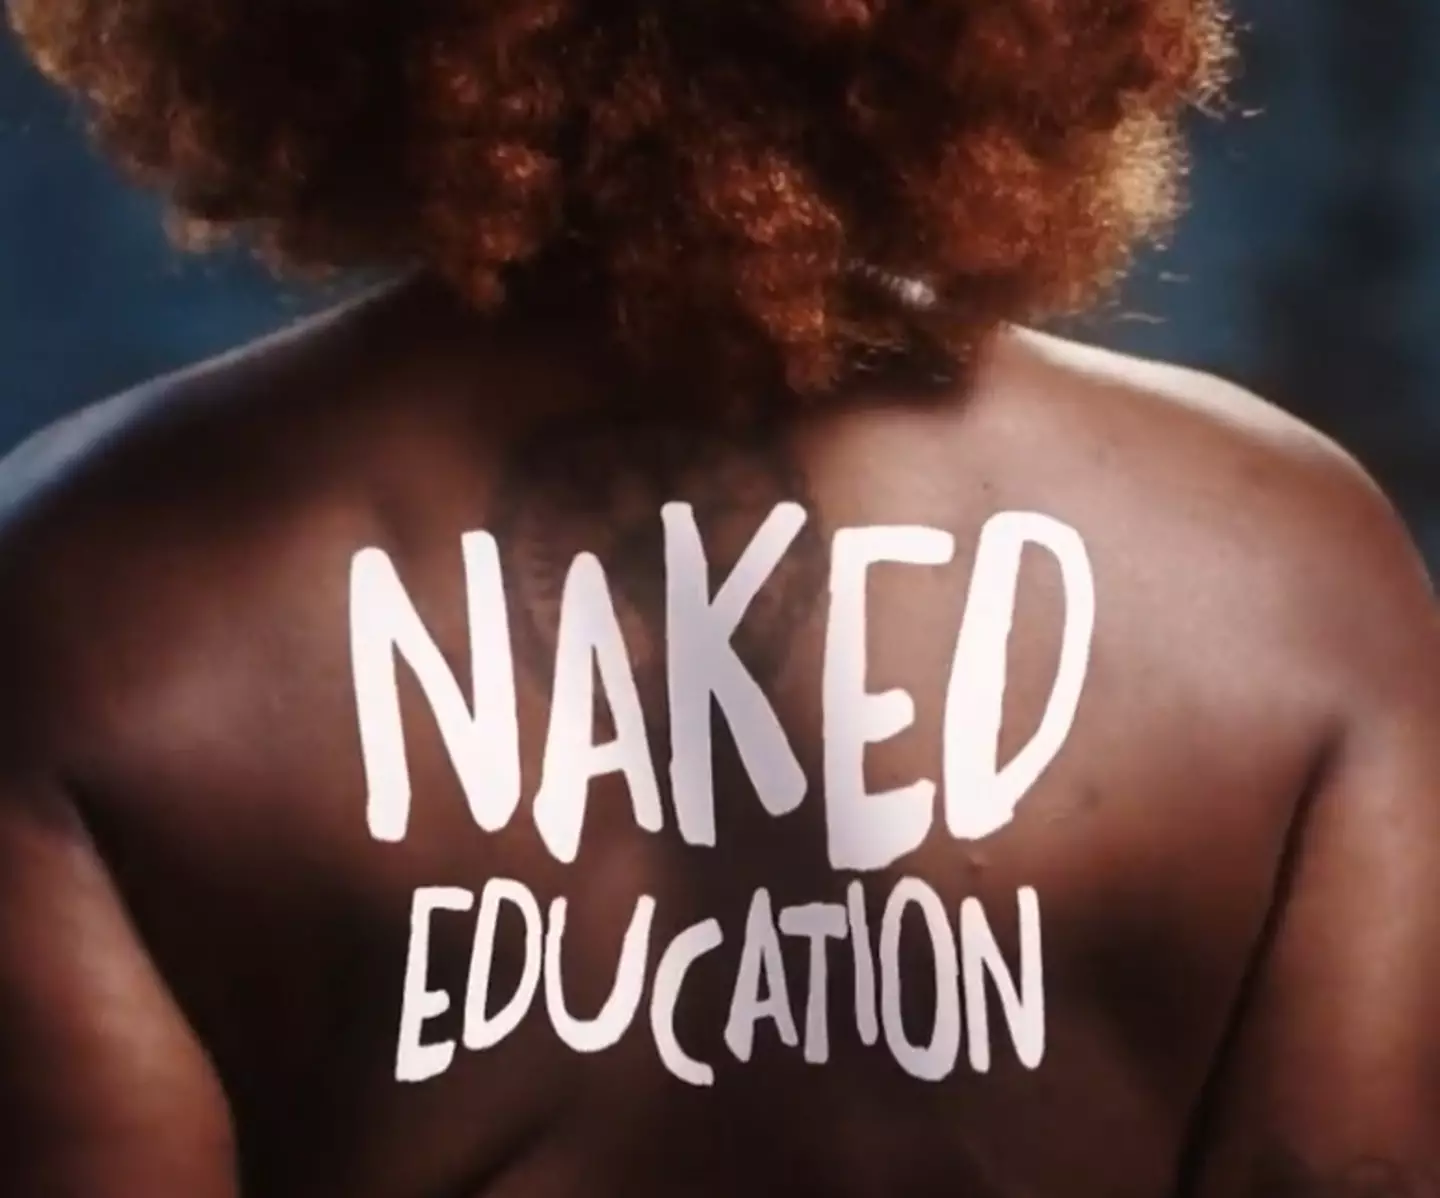 Channel 4's new show Naked Education aims to promote body positivity and have honest conversations about our own bodies.